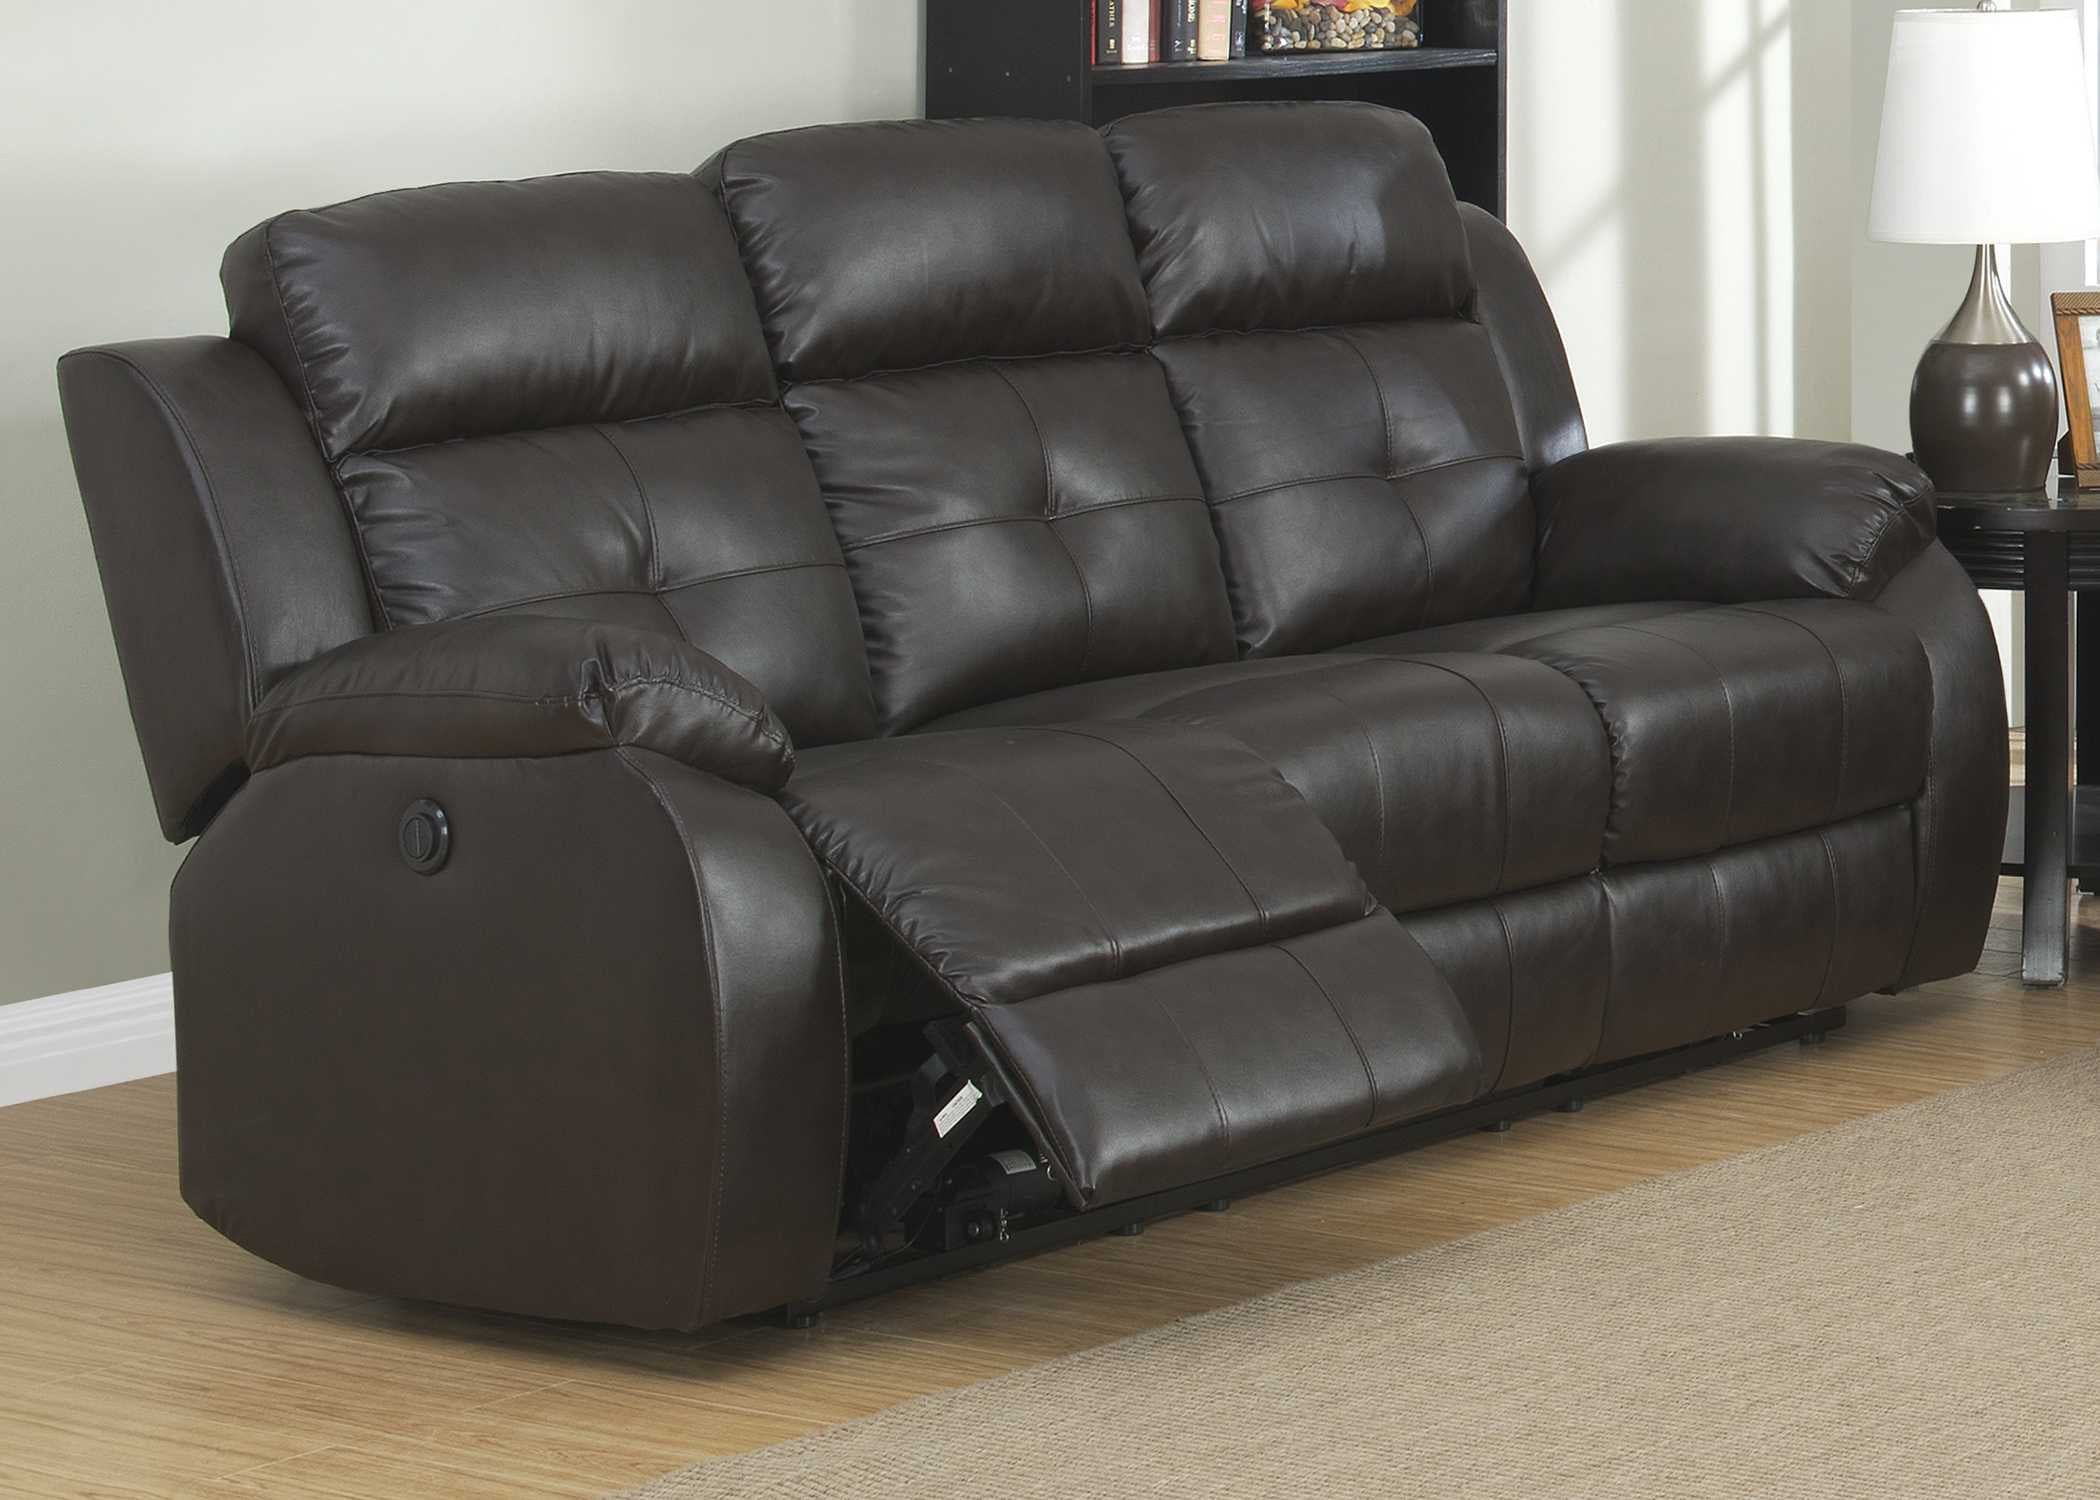 tomlin leather power reclining sofa review